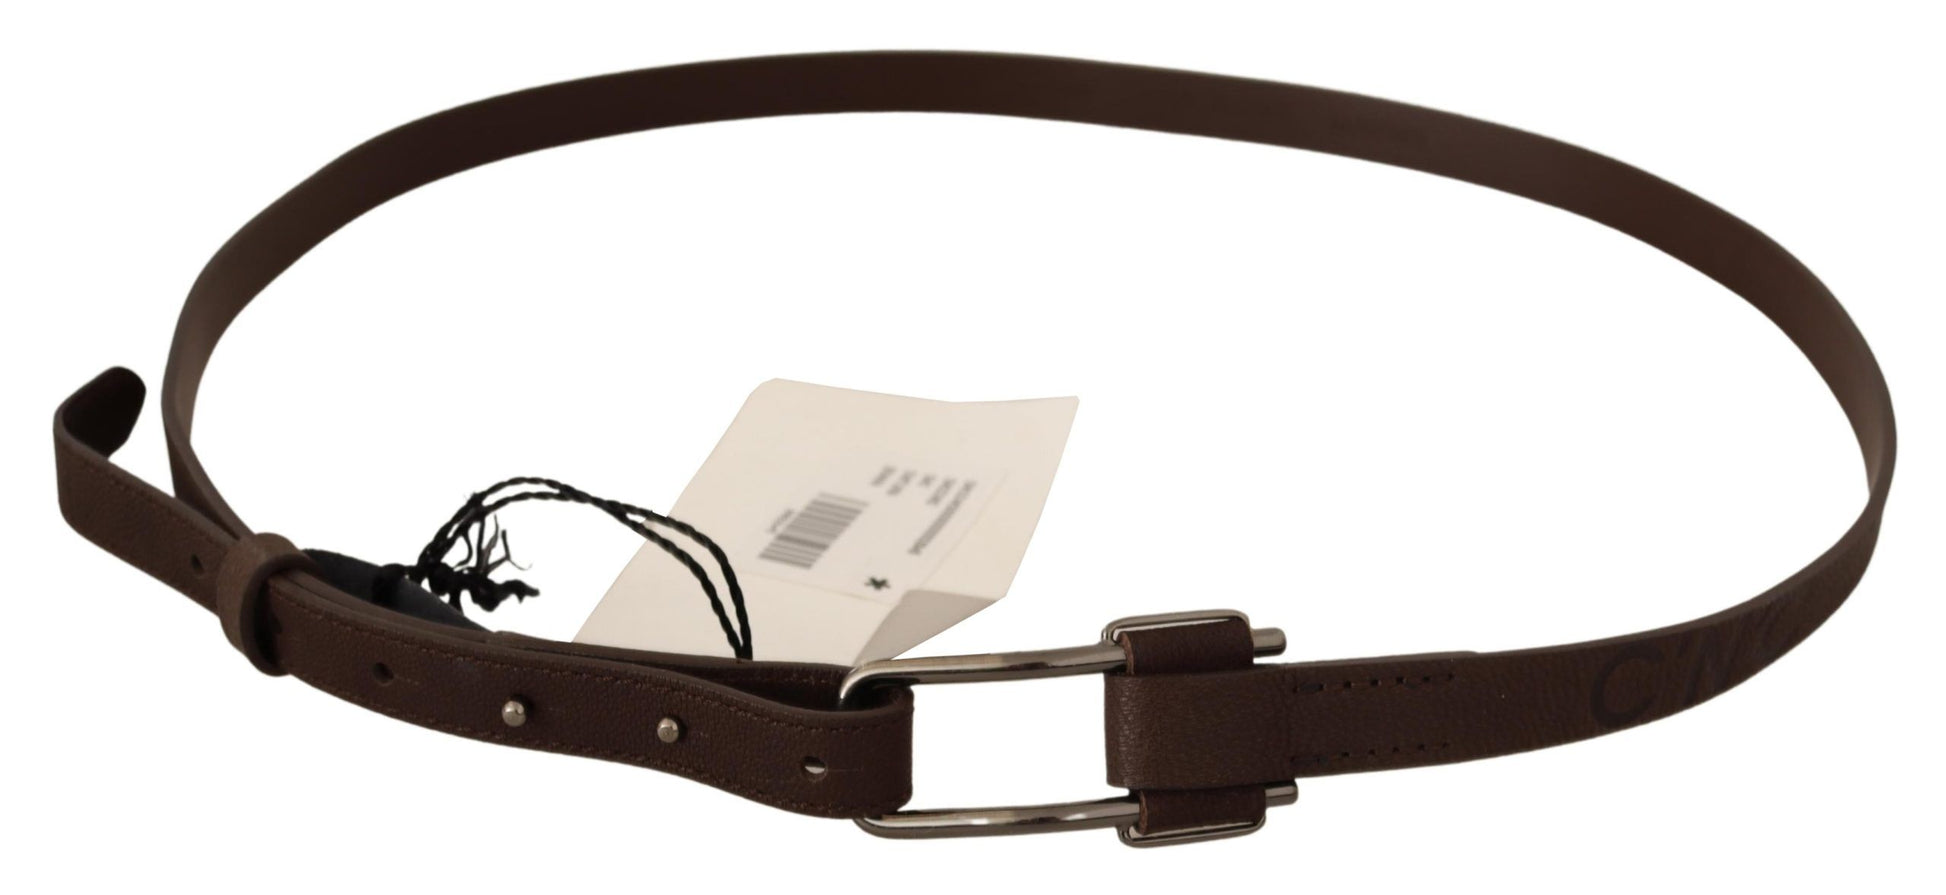 Brown WX Silver Metal Buckle Belt - Designed by Costume National Available to Buy at a Discounted Price on Moon Behind The Hill Online Designer Discount Store